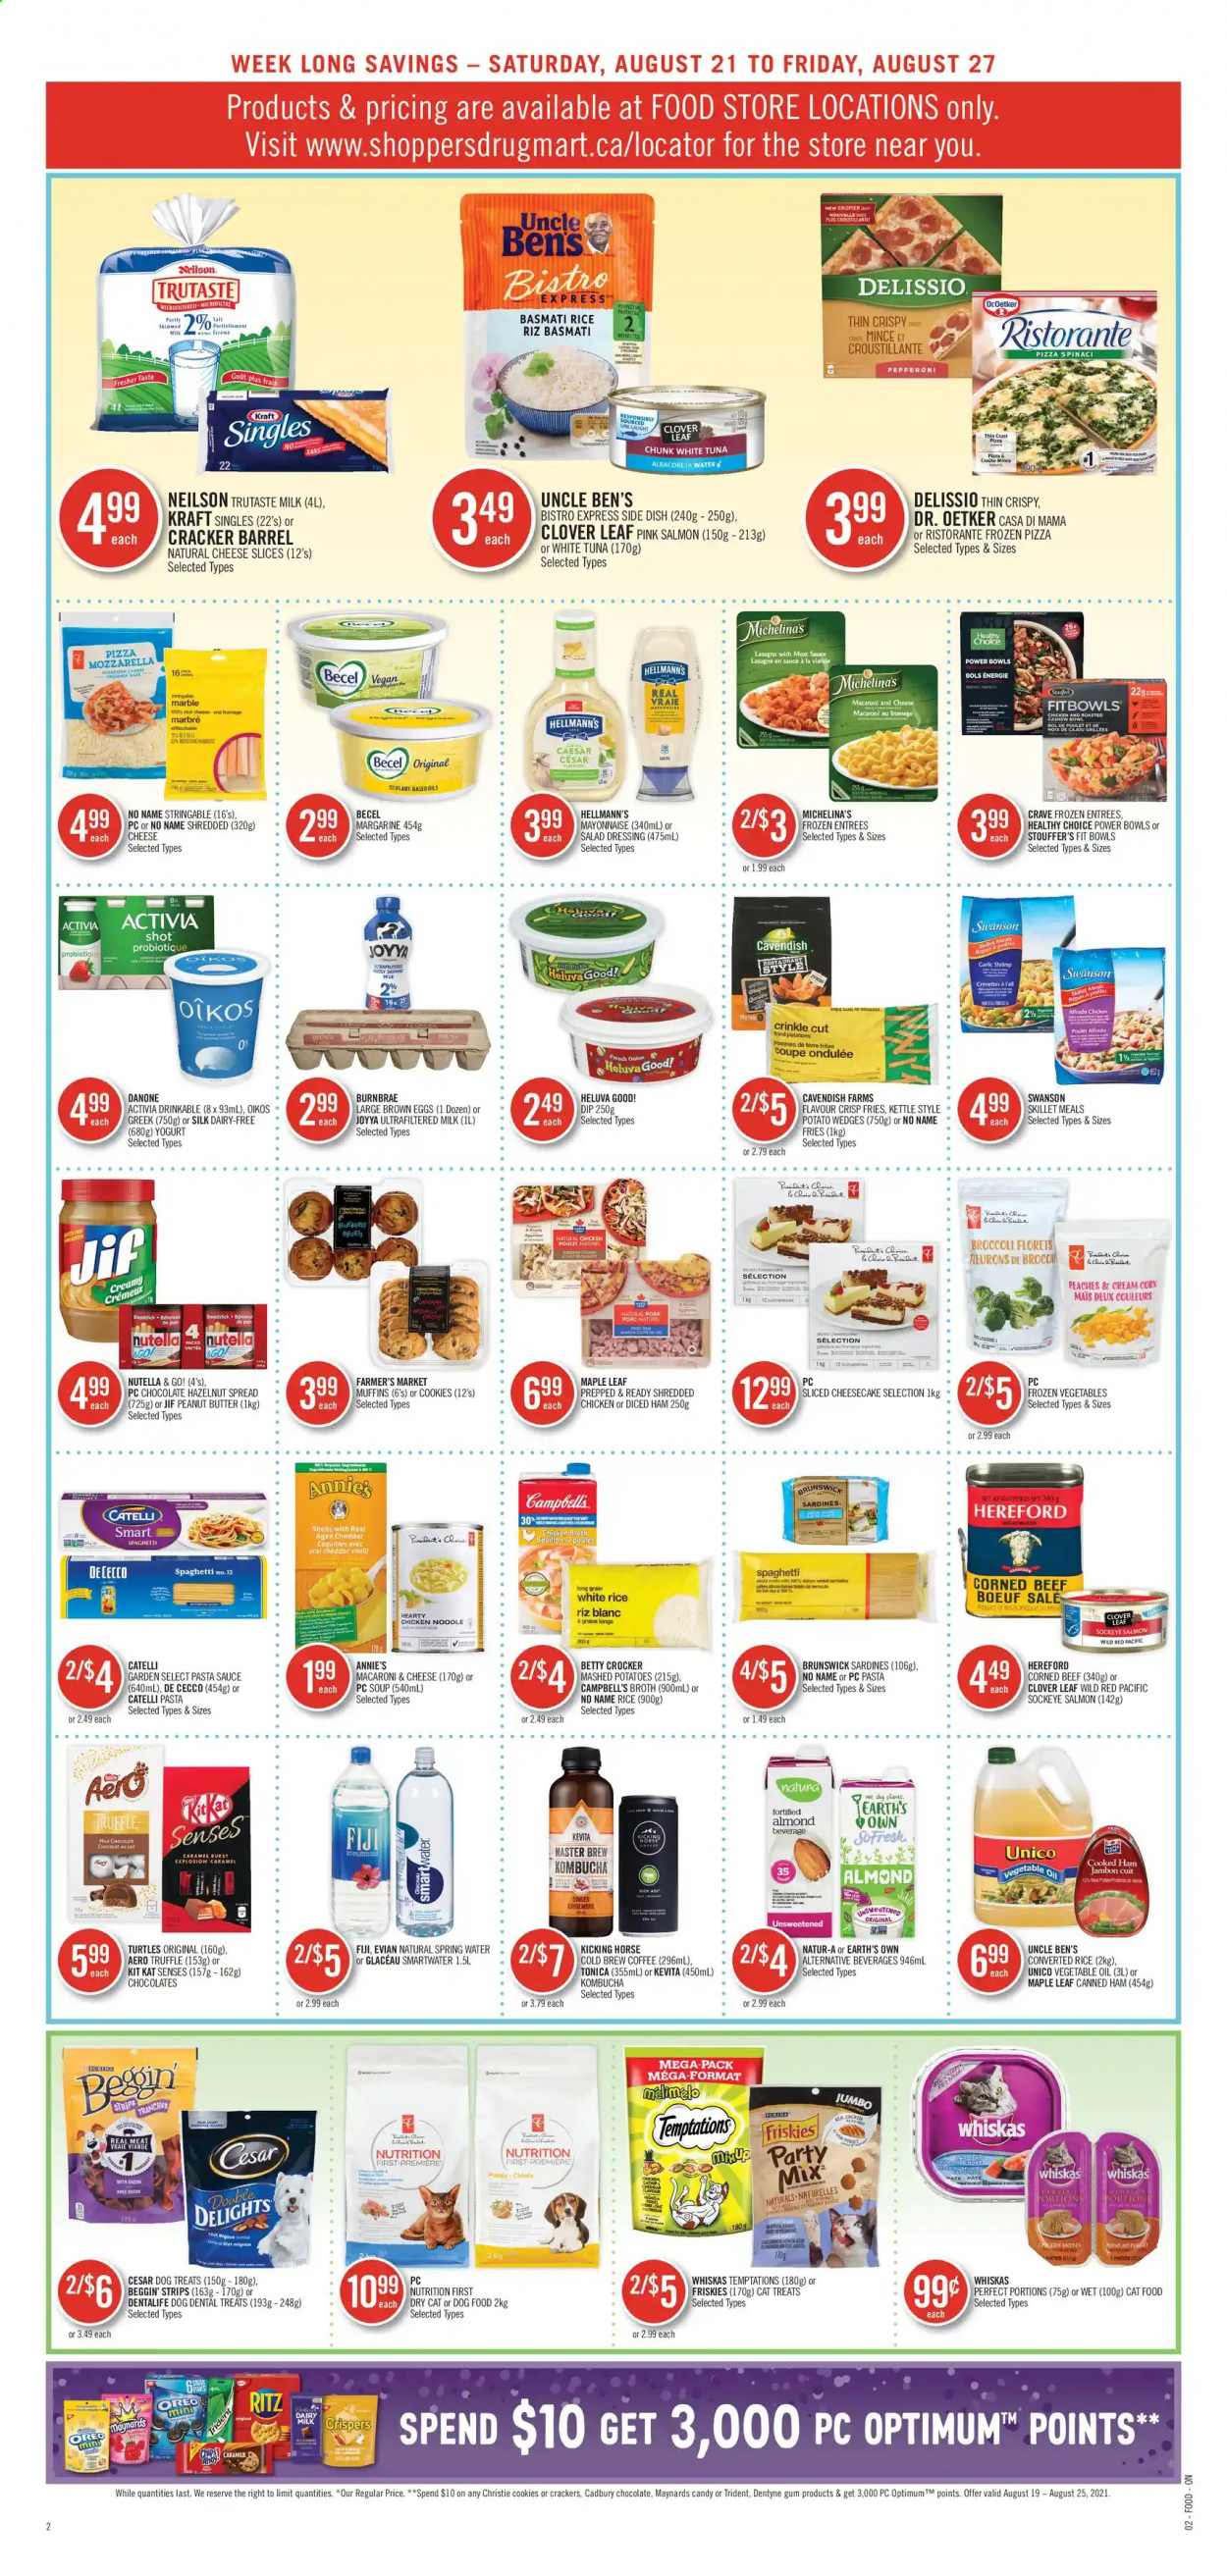 thumbnail - Shoppers Drug Mart Flyer - August 21, 2021 - August 27, 2021 - Sales products - cookies, chocolate, truffles, KitKat, crackers, muffin, Cadbury, Trident, Annie's, RITZ, bouillon, semolina, chicken broth, Dr. Oetker, broth, corn, corned beef, sardines, pasta sauce, soup, Uncle Ben's, basmati rice, spaghetti, white rice, noodles, Campbell's, caramel, salad dressing, dressing, Hellmann’s, Kraft®, vegetable oil, oil, peanut butter, hazelnut spread, Jif, Clover, spring water, Smartwater, Evian, kombucha, KeVita, coffee, Go!, Oreo, Nutella. Page 6.